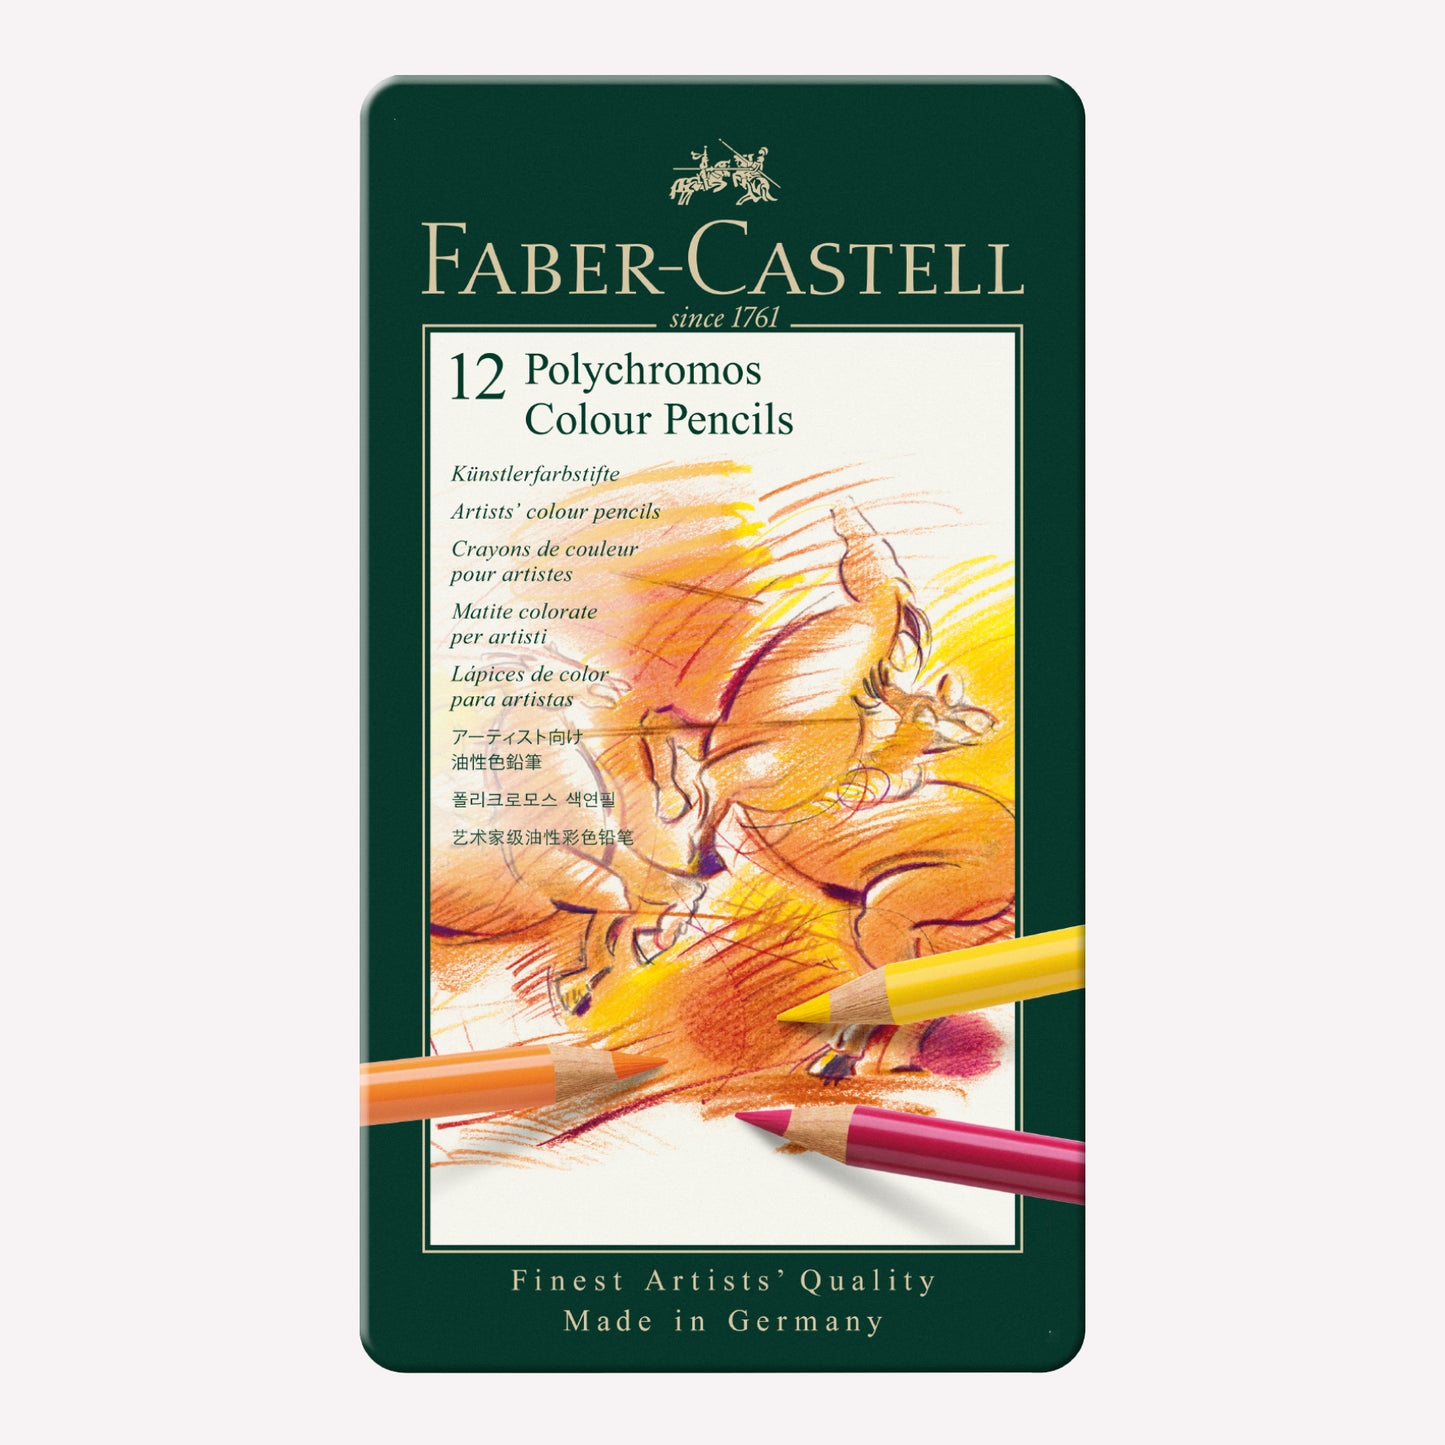 Faber-Castel set of 12 polychromos colour pencils, packaged in a green metal tin with an expressive illustration of a horse on the front. 